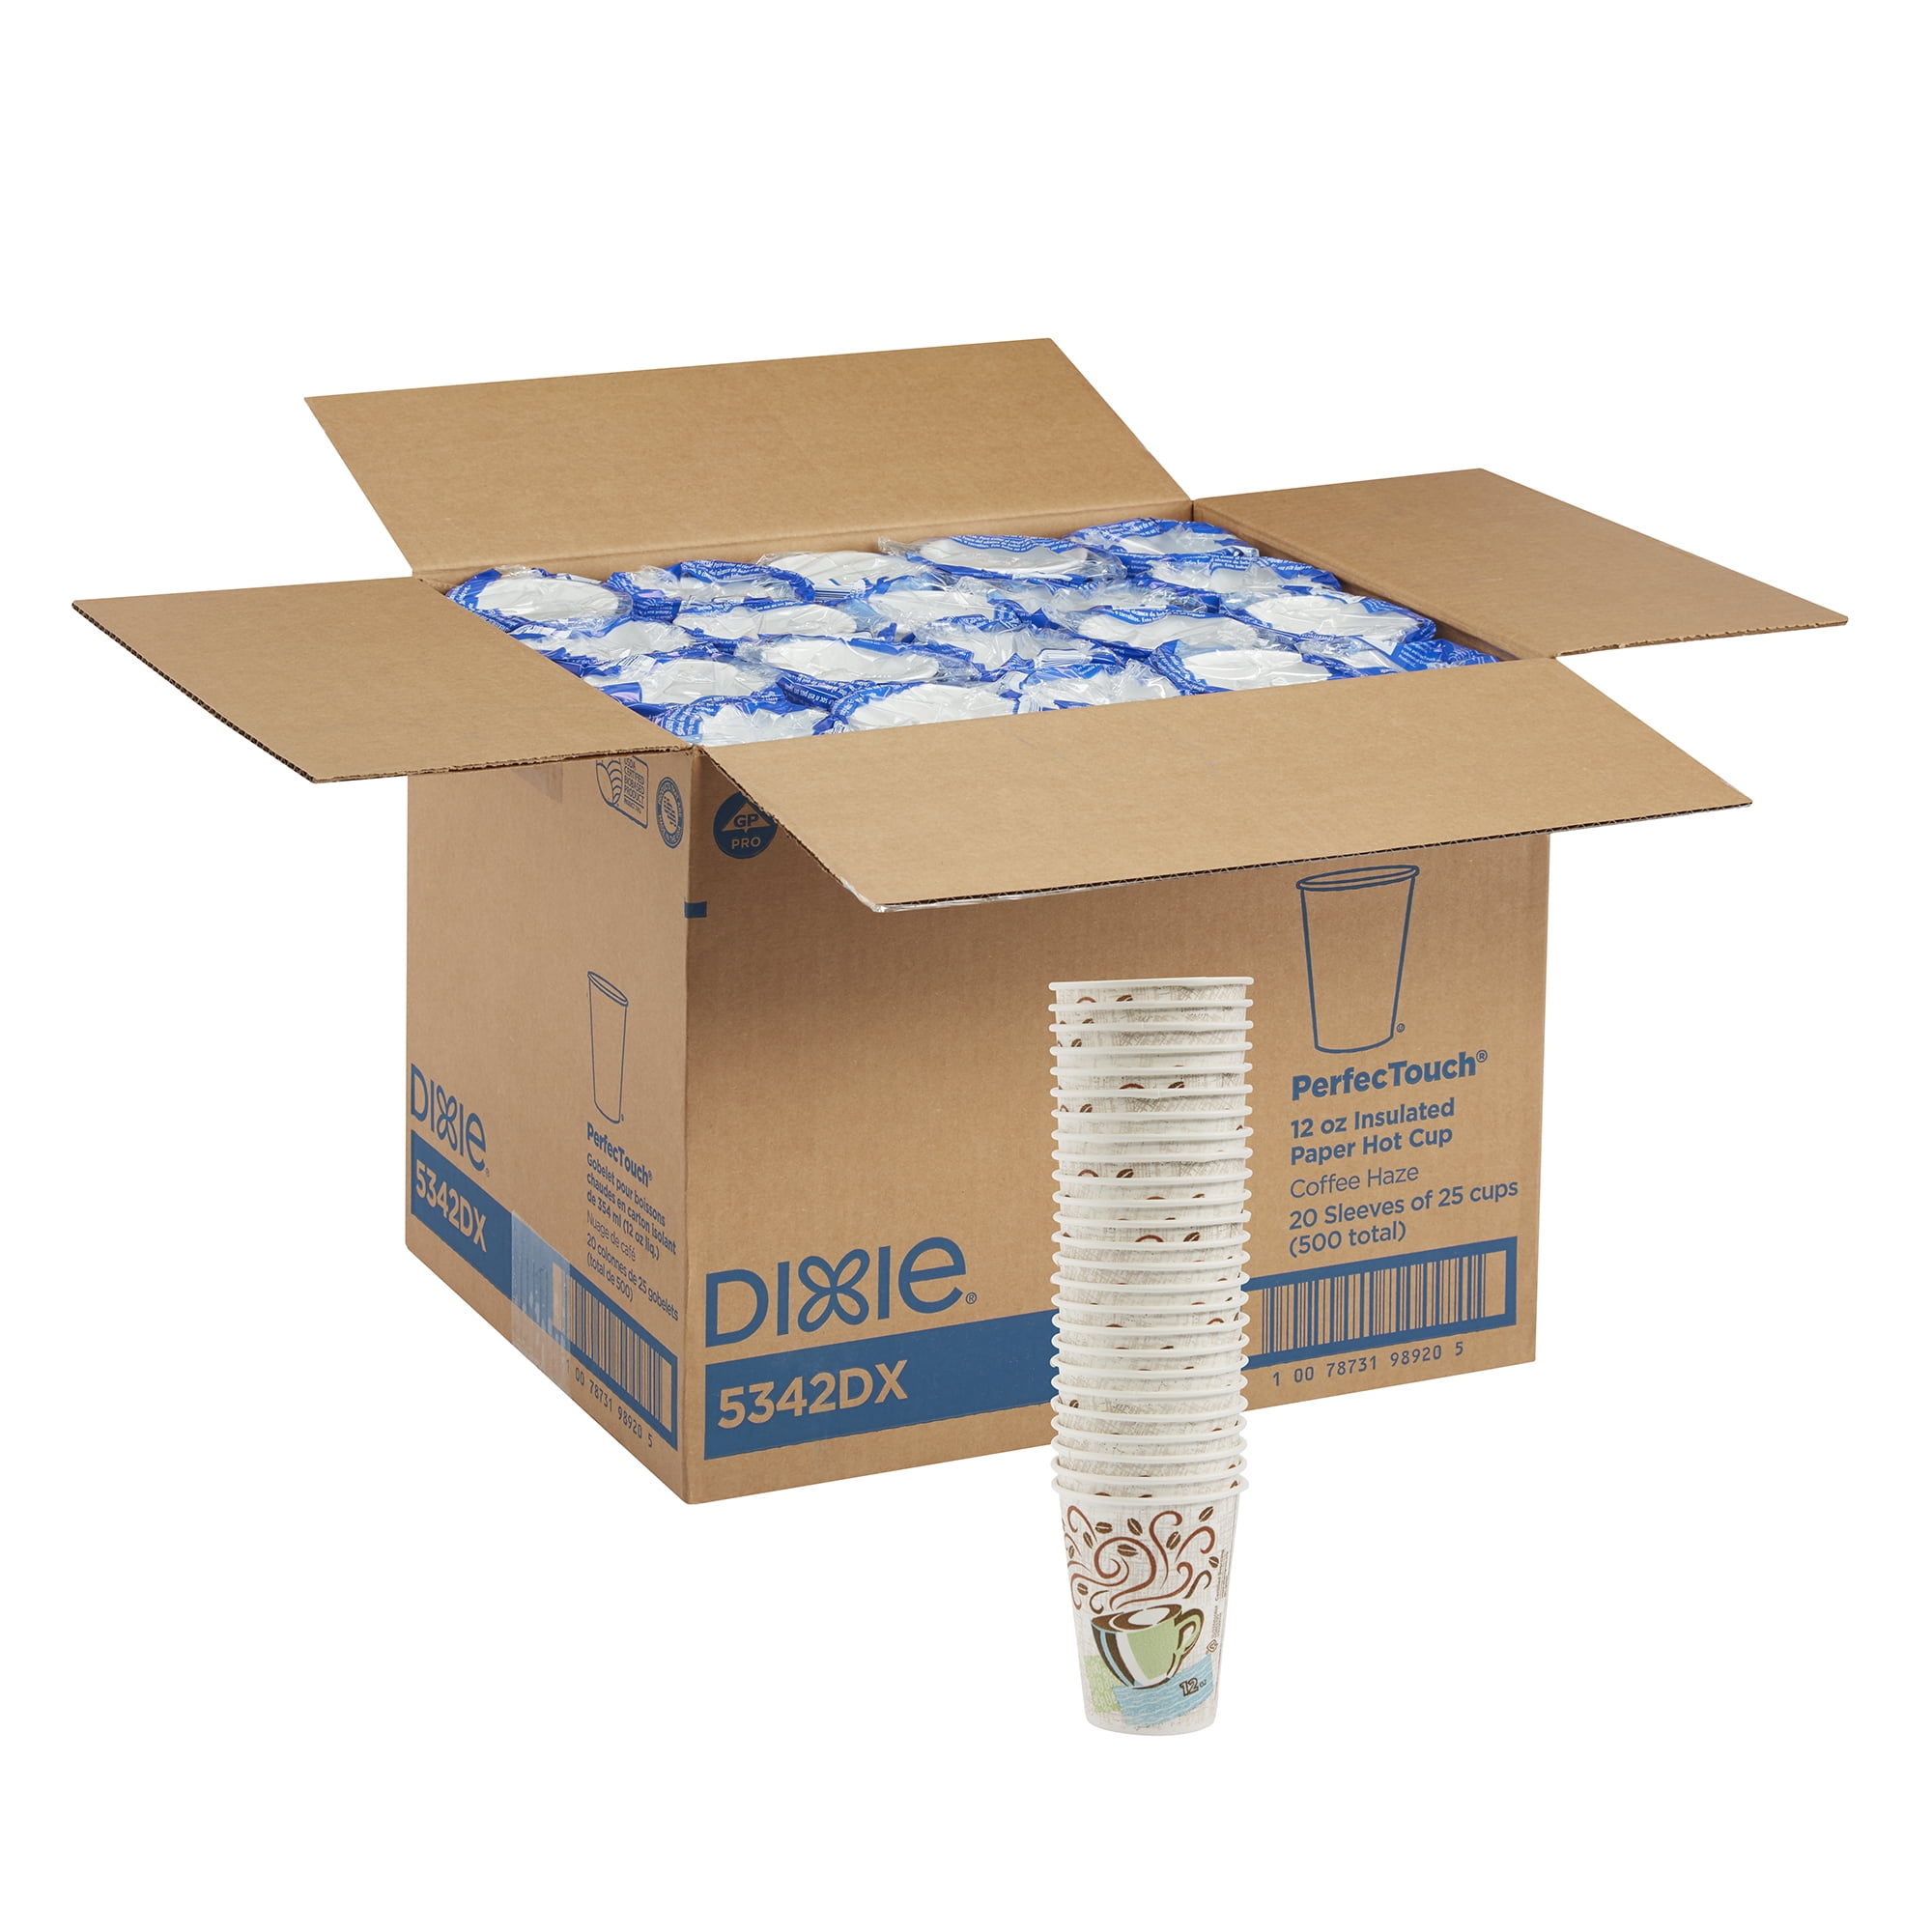 Dixie® PerfecTouch® (5342DX) 12 oz. Insulated Paper Hot Coffee Cup by GP PRO (Georgia-Pacific), Fits Large Lids, Coffee Haze, 20 Sleeves of 25 Cups (500 Cups Total)